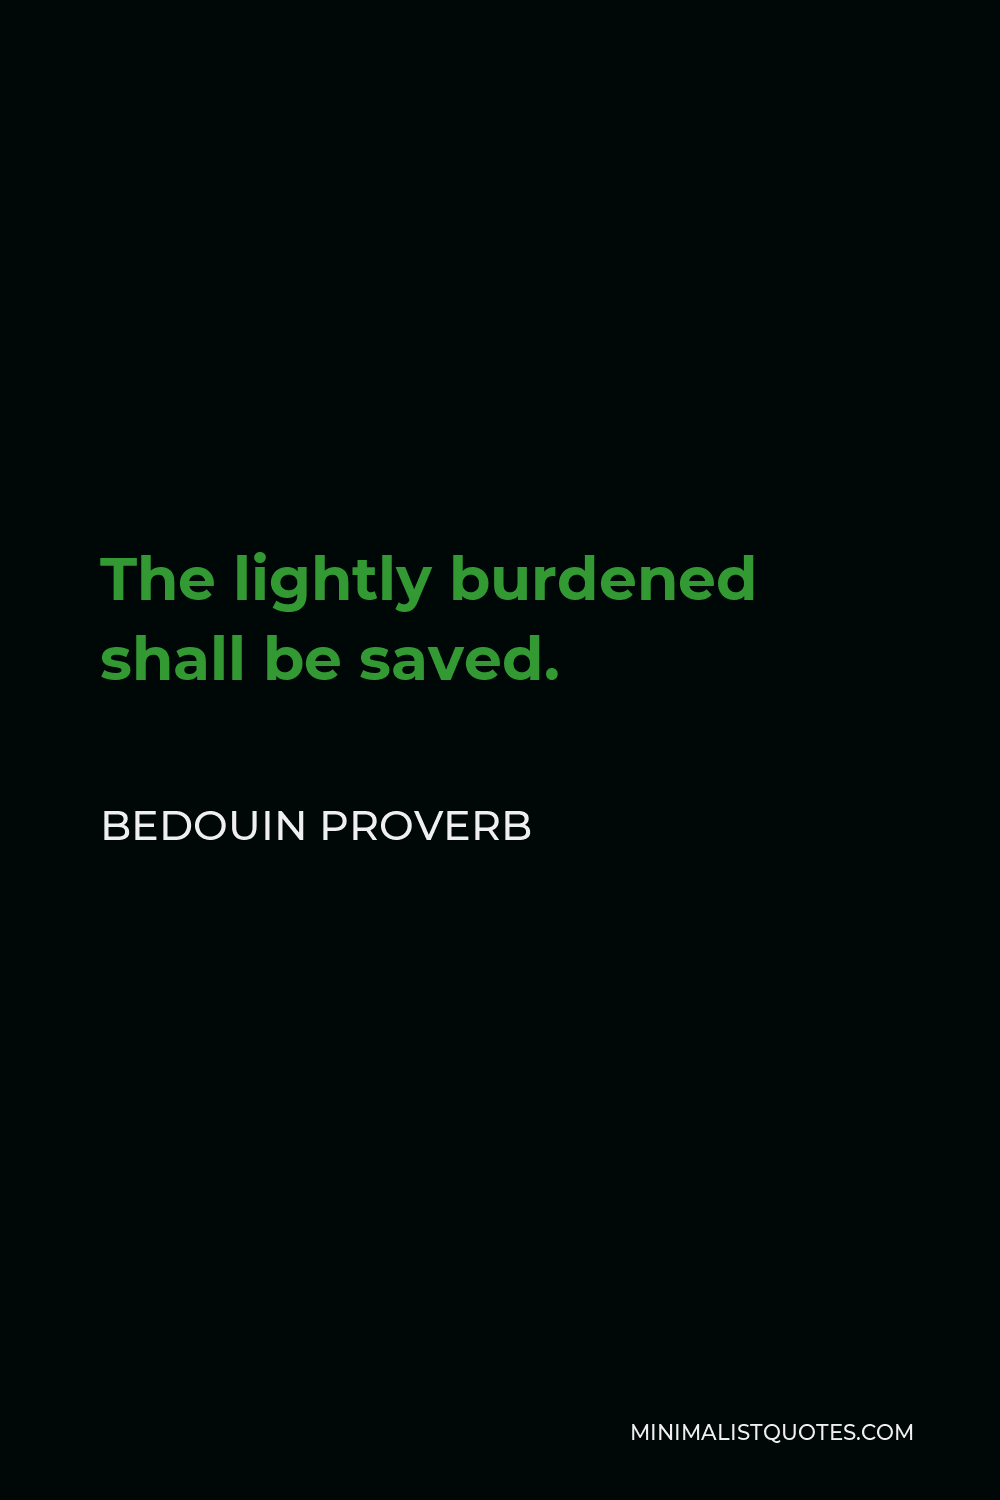 Bedouin Proverb Quote - The lightly burdened shall be saved.